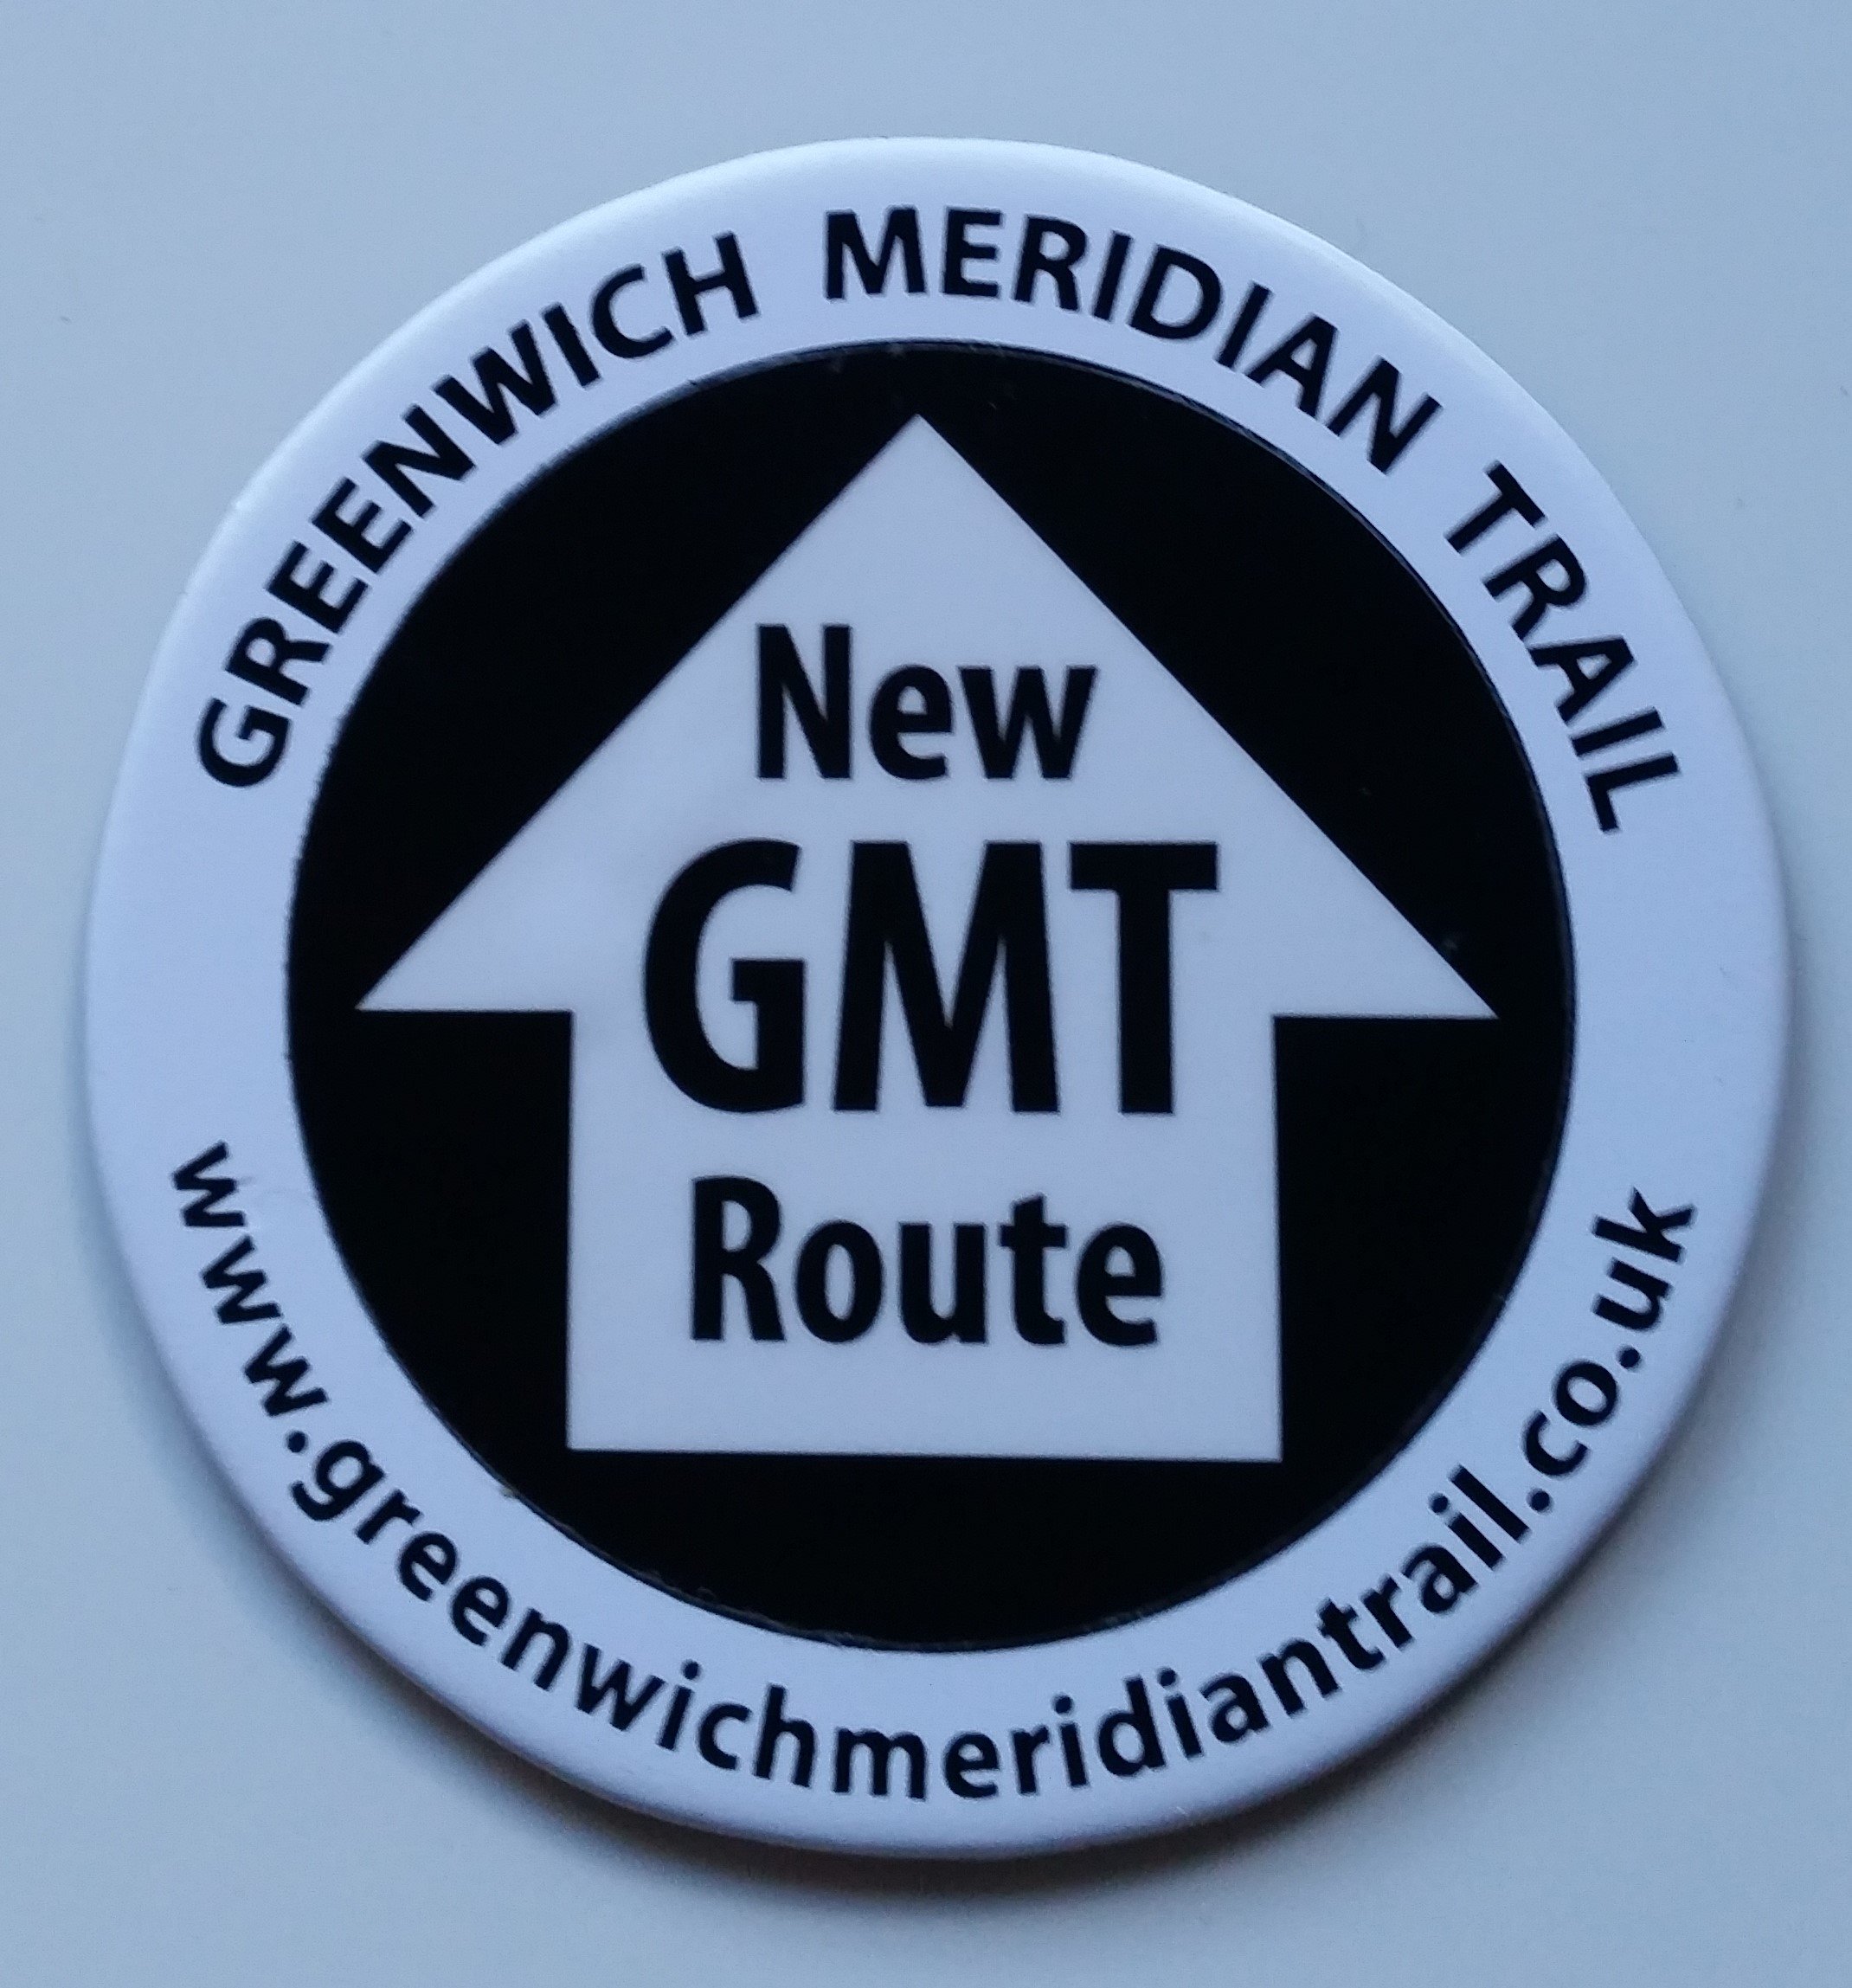 GMT New Route Way Mark.jpg